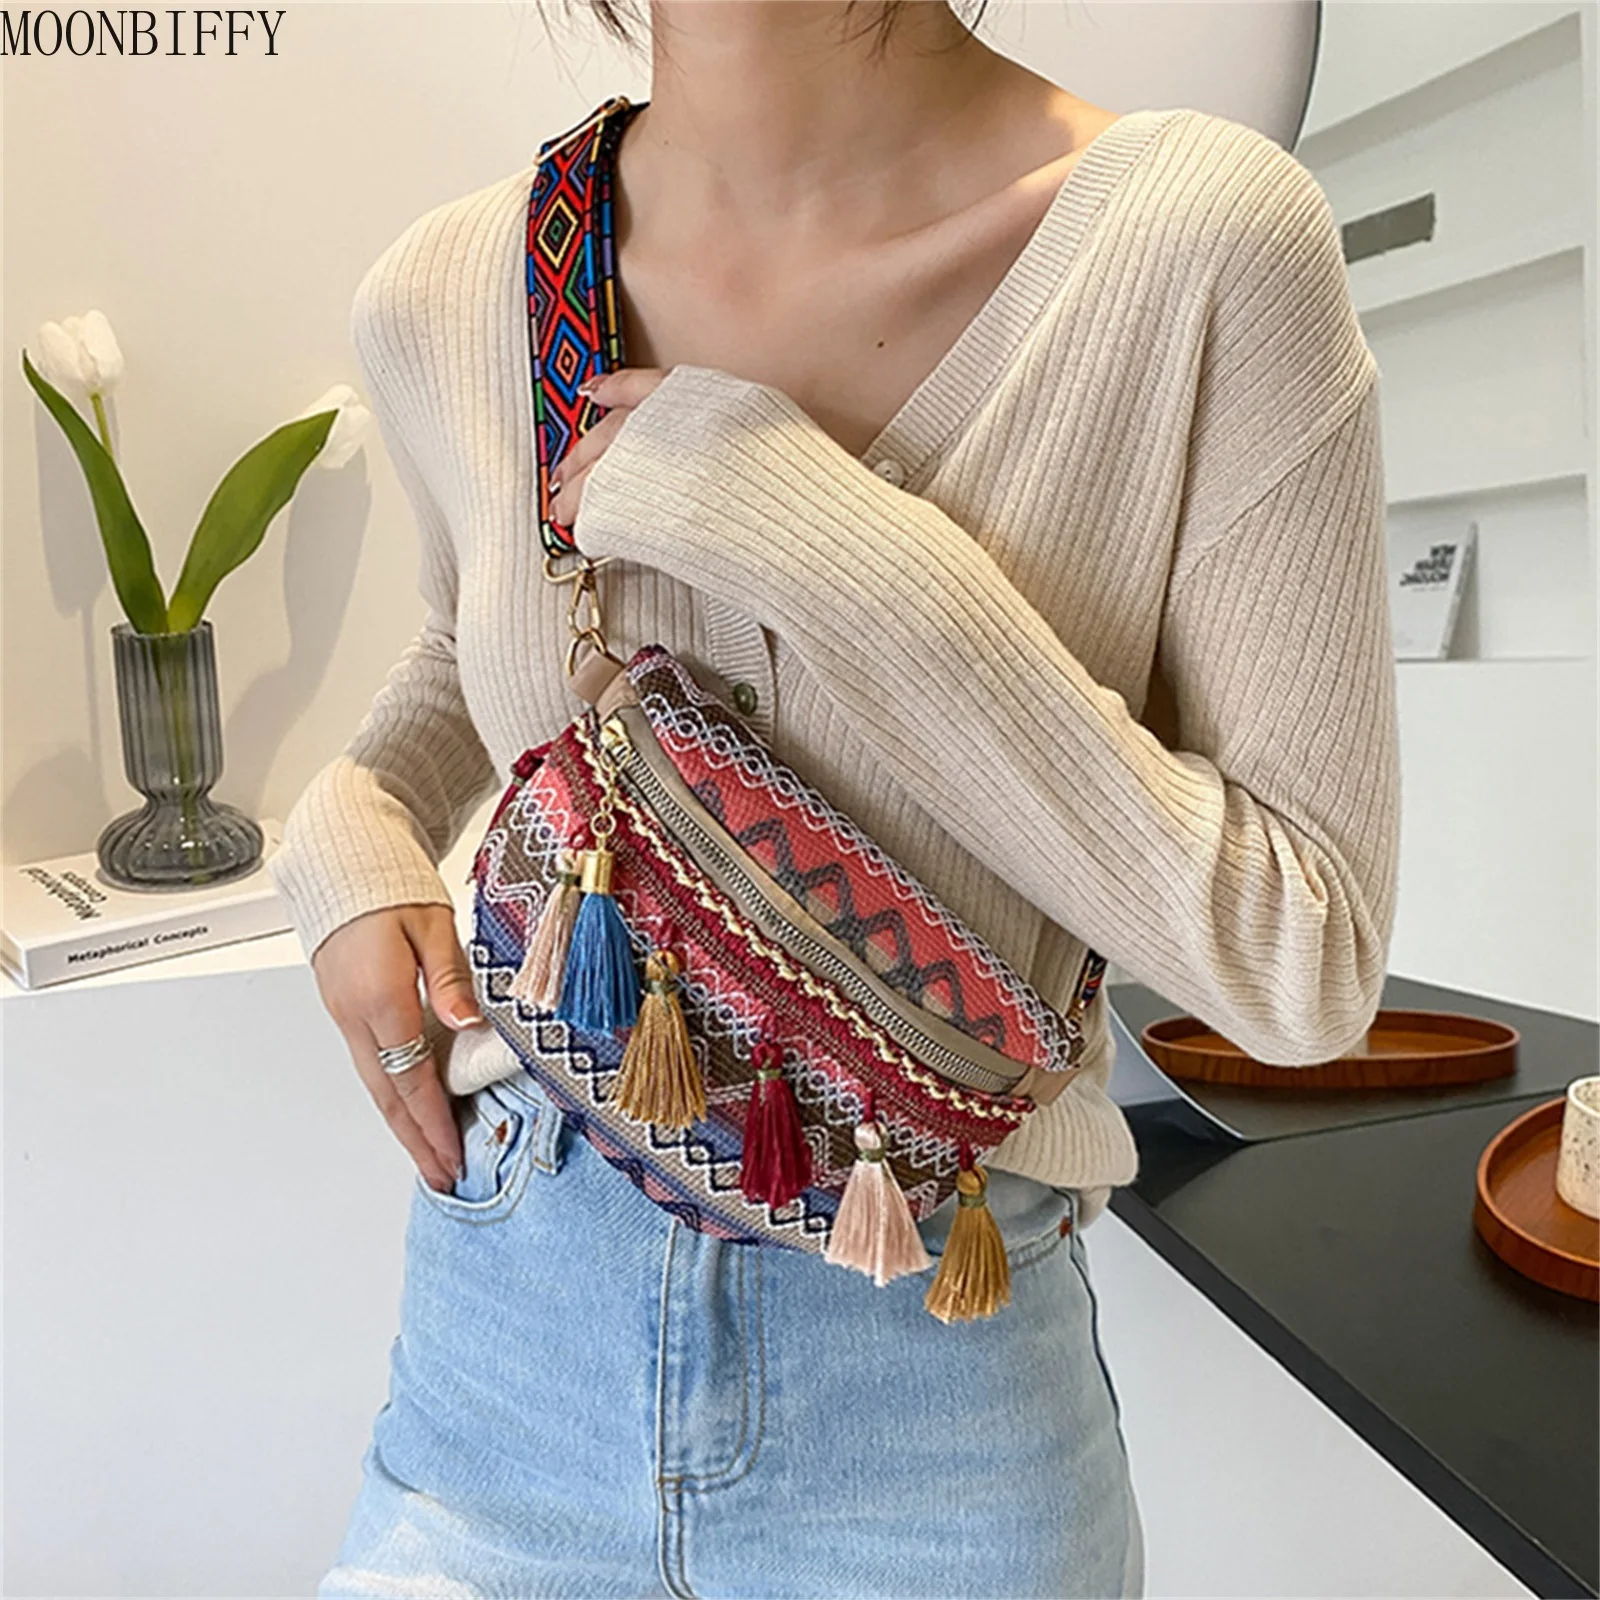 

Female Ethnic Style Waist Bag with Adjustable Strap Variegated Color Fanny Pack with Fringe Decor Fashion Crossbody Chest Bags